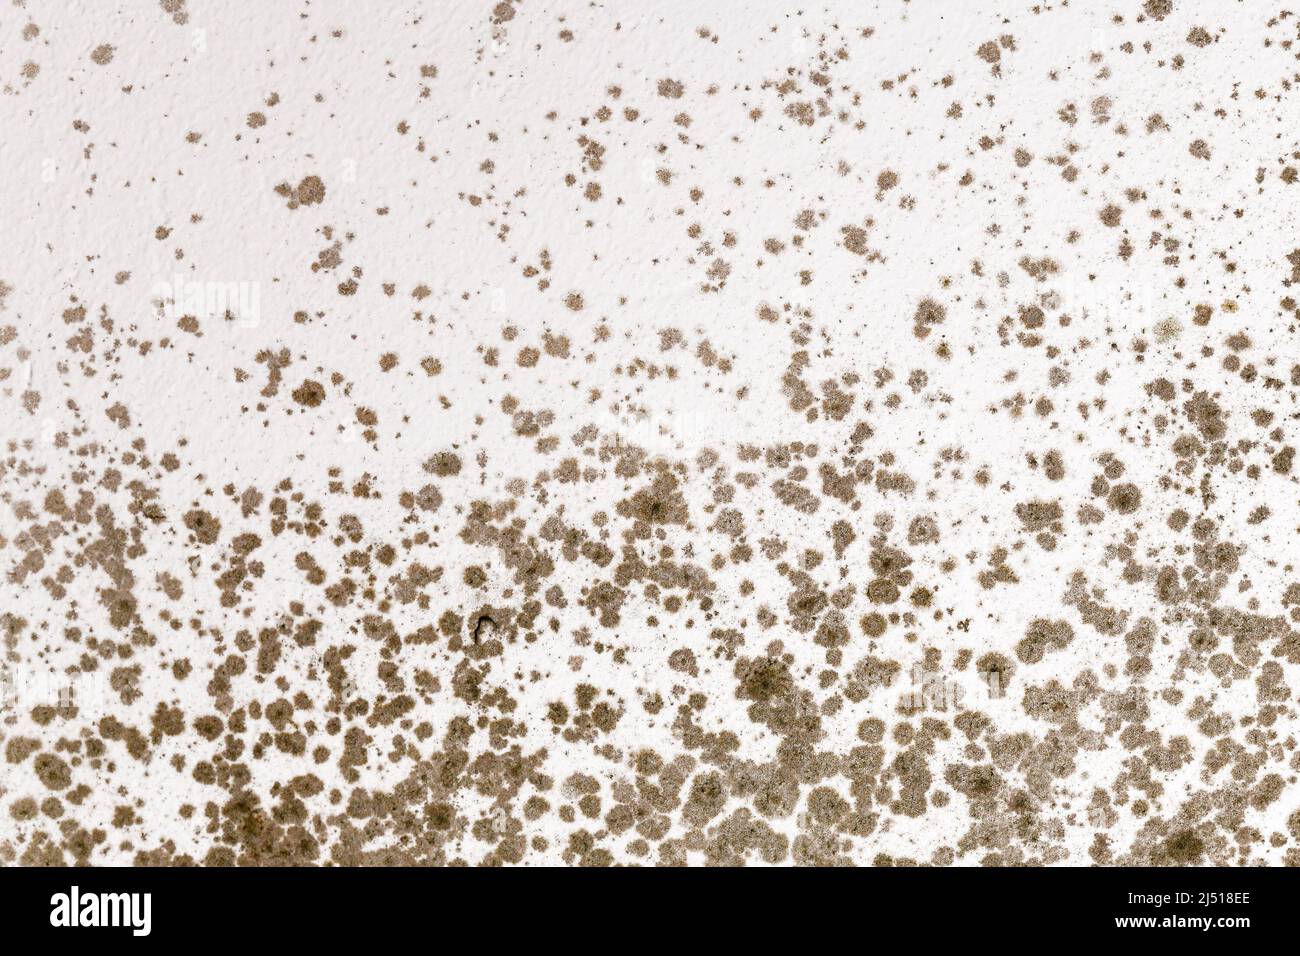 Ugly fungal mold spots growing on white room wall Stock Photo